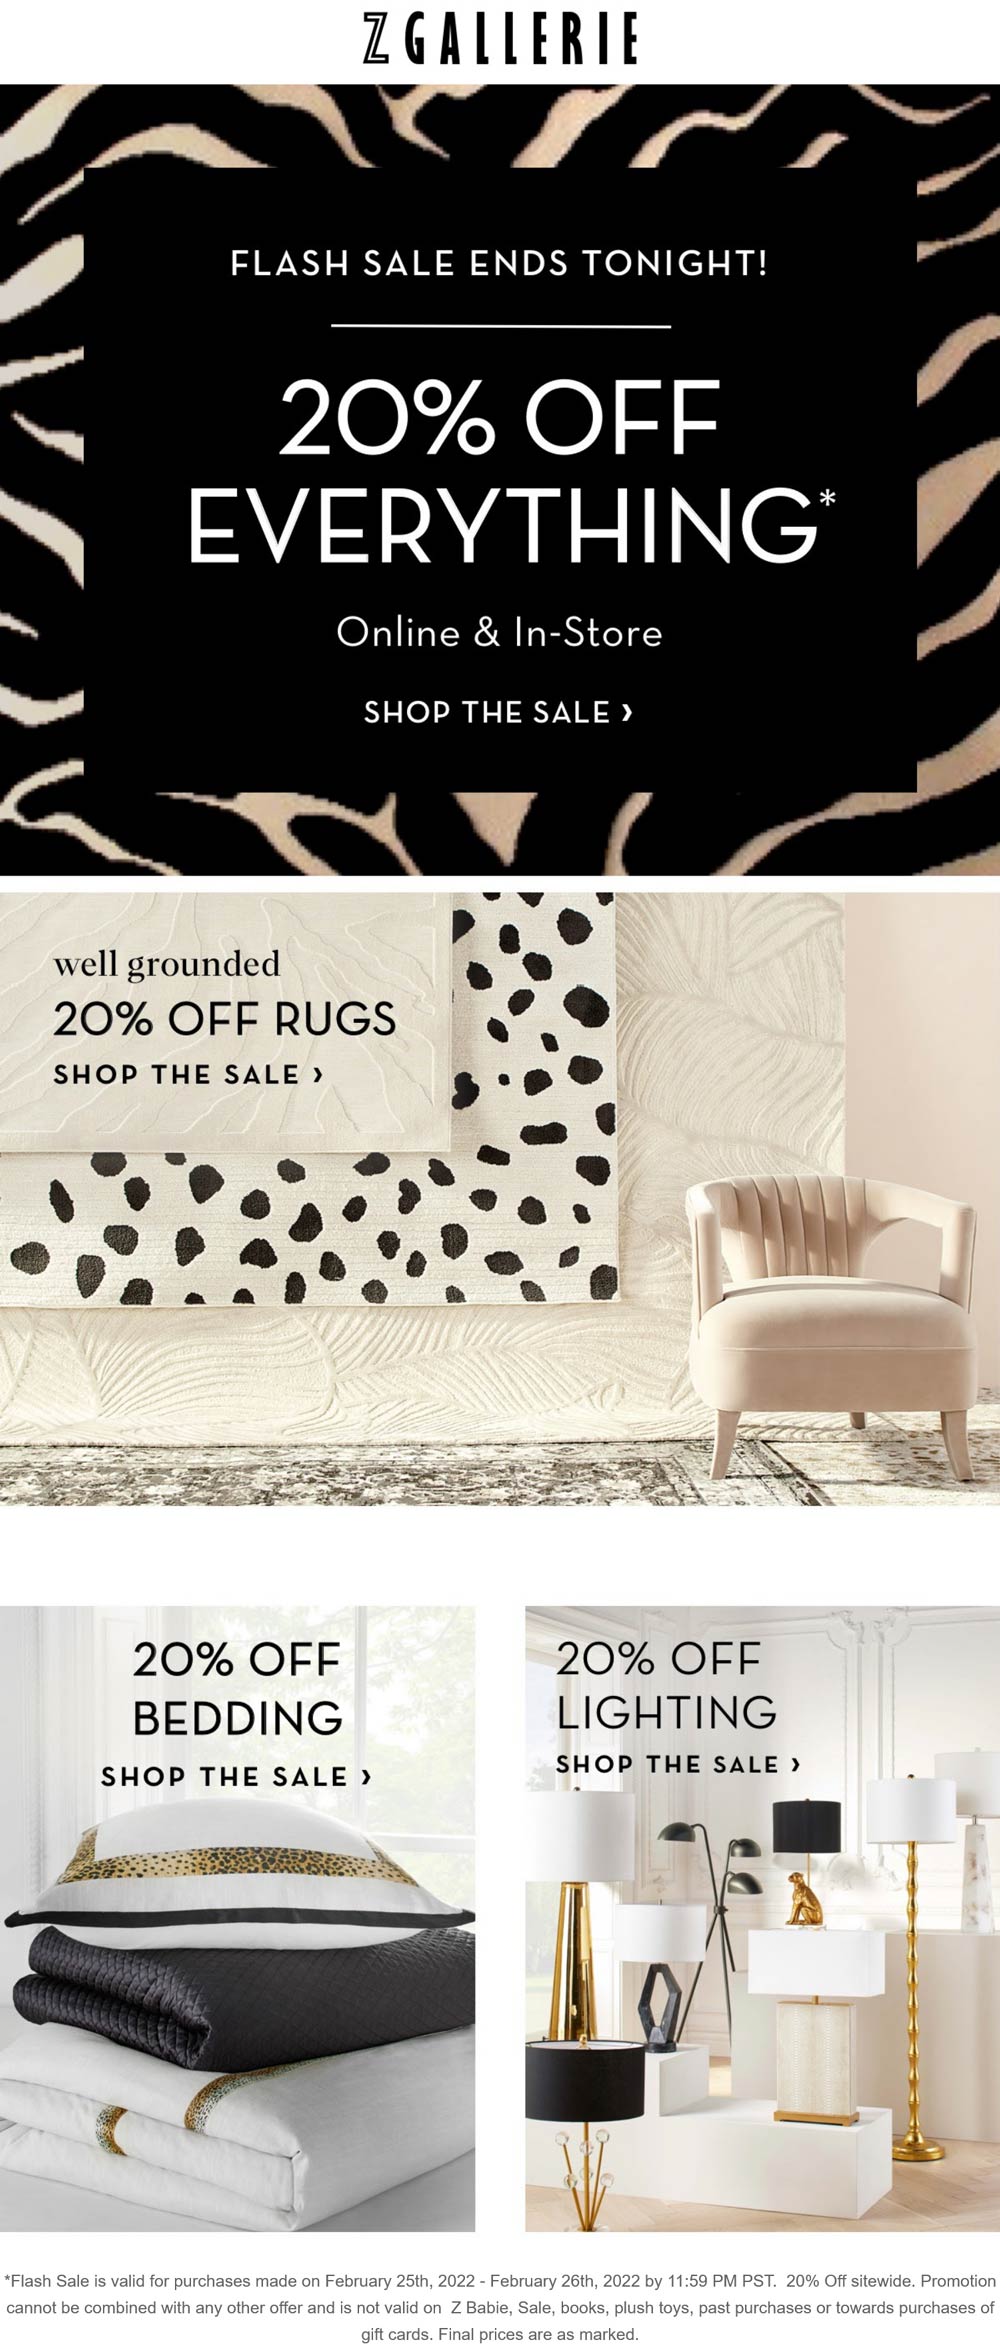 Z Gallerie stores Coupon  20% off everything today at Z Gallerie, ditto online #zgallerie 